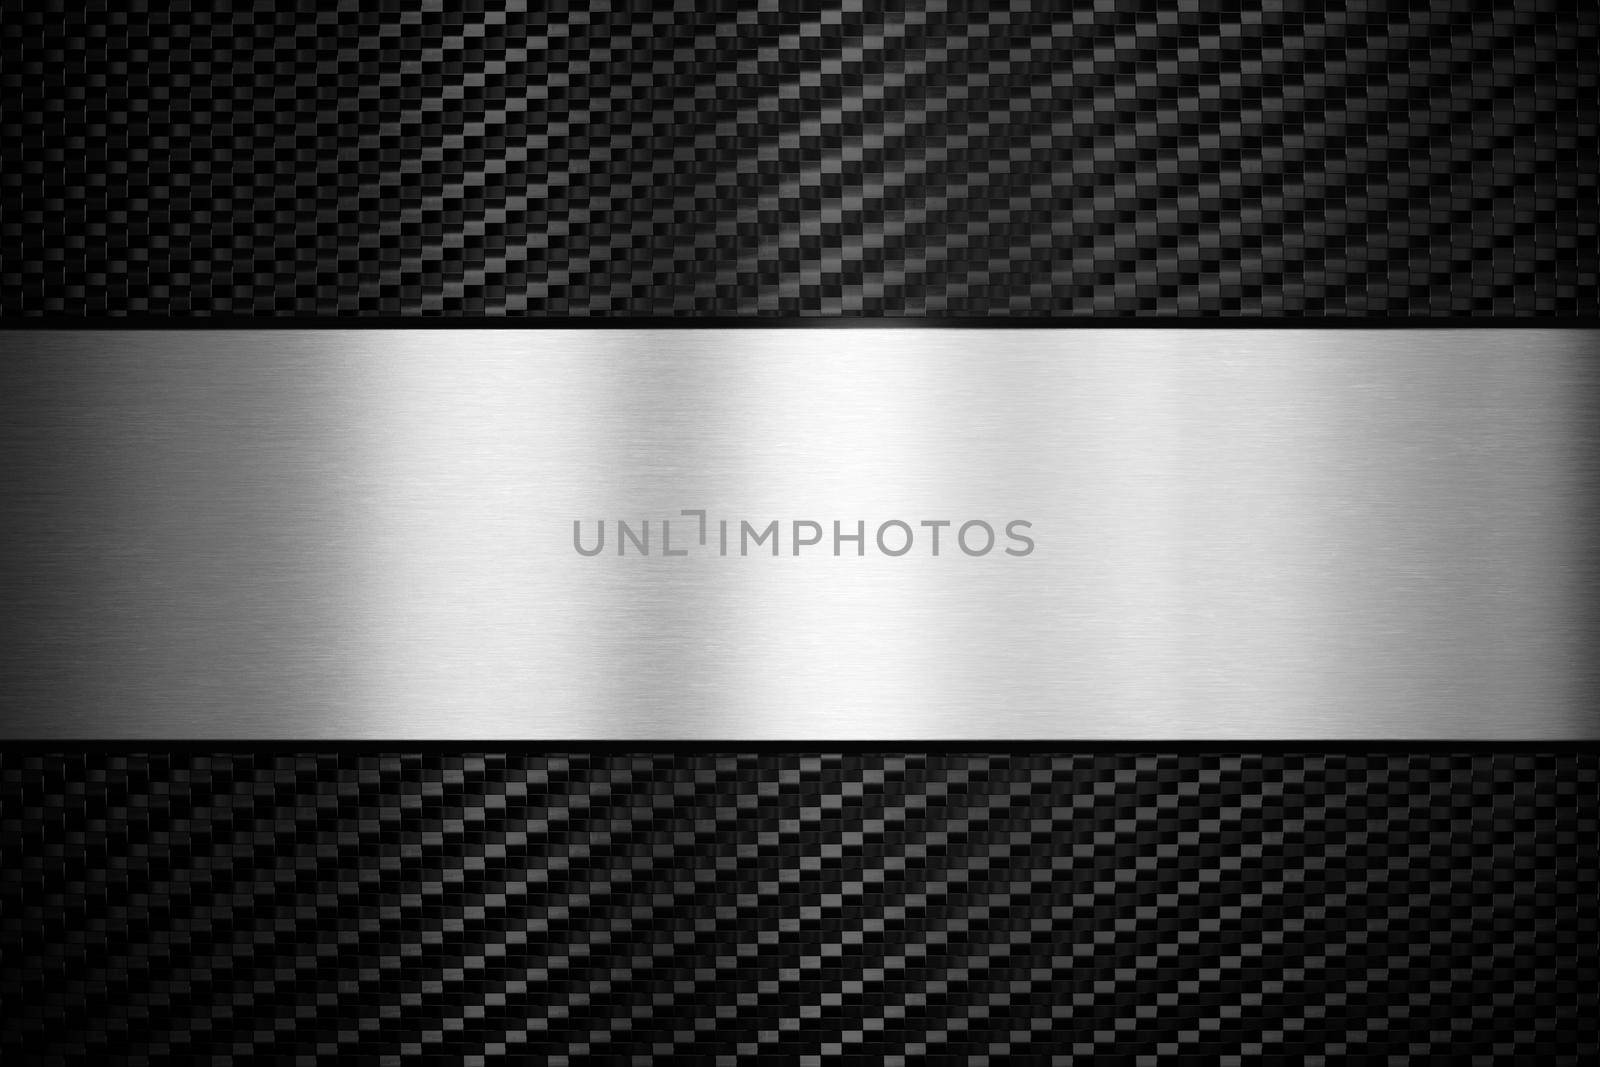 Futuristic carbon fiber background pattern. 3d rendering by Taut